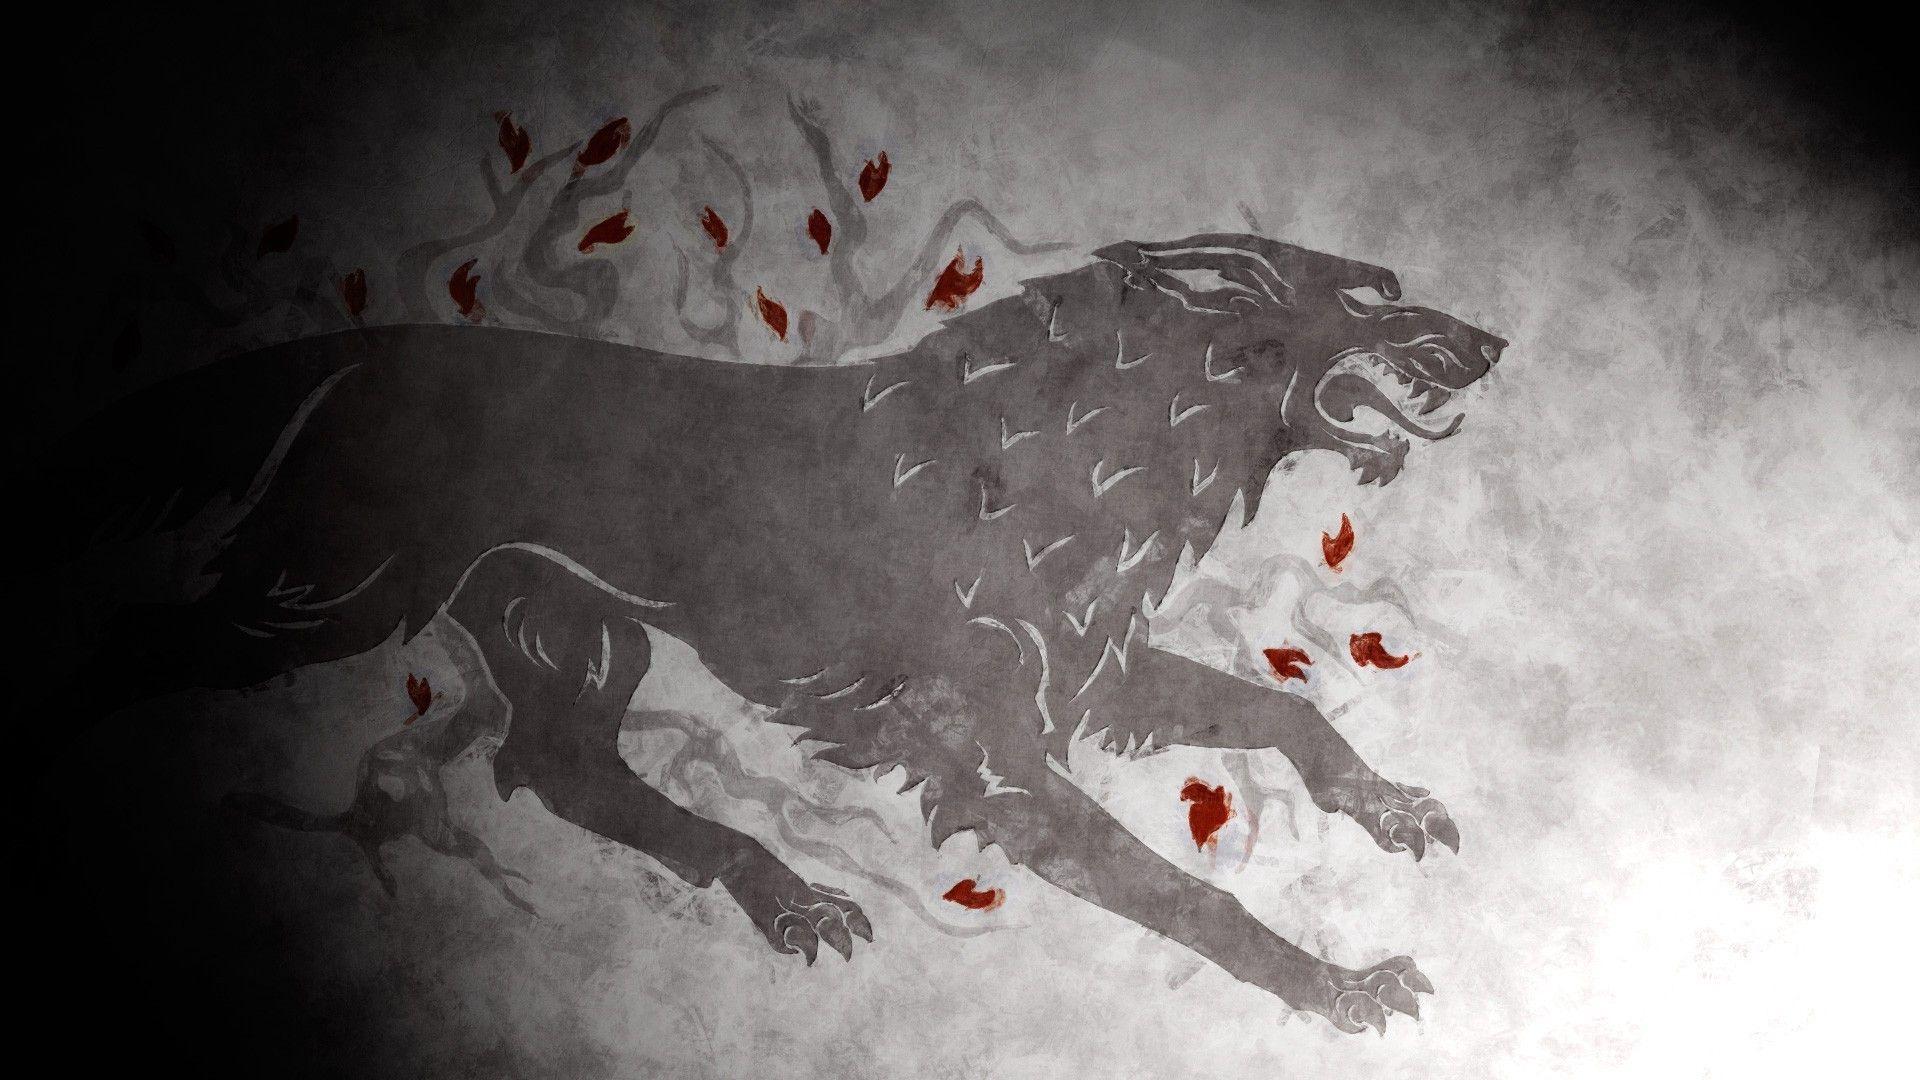 Game Of Thrones Wolf Wallpapers Top Free Game Of Thrones Wolf